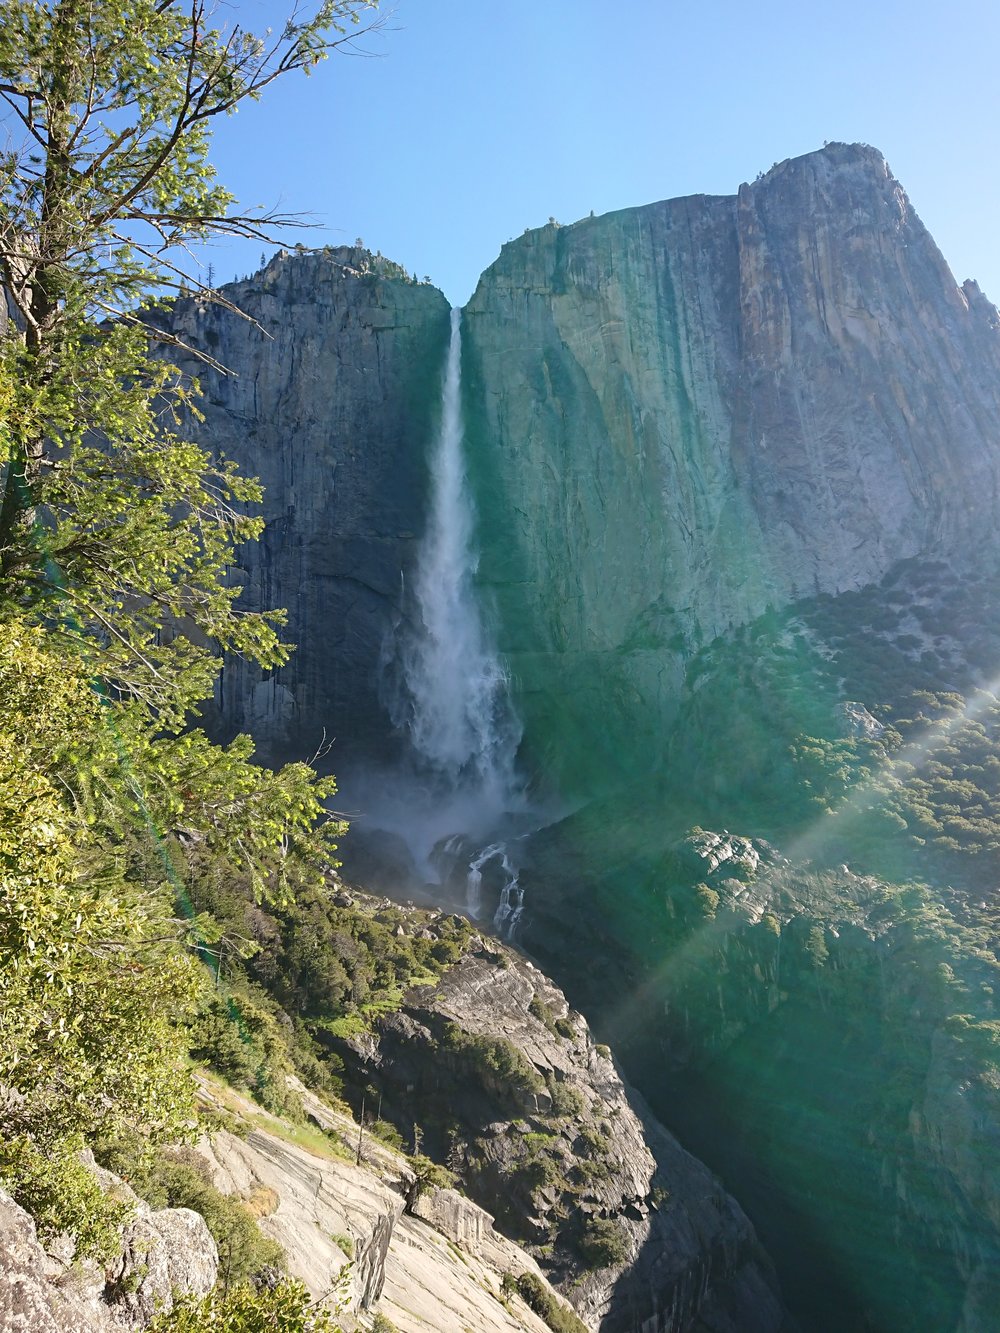  Upper Yosemite Falls which is the tallest waterfall in North America 